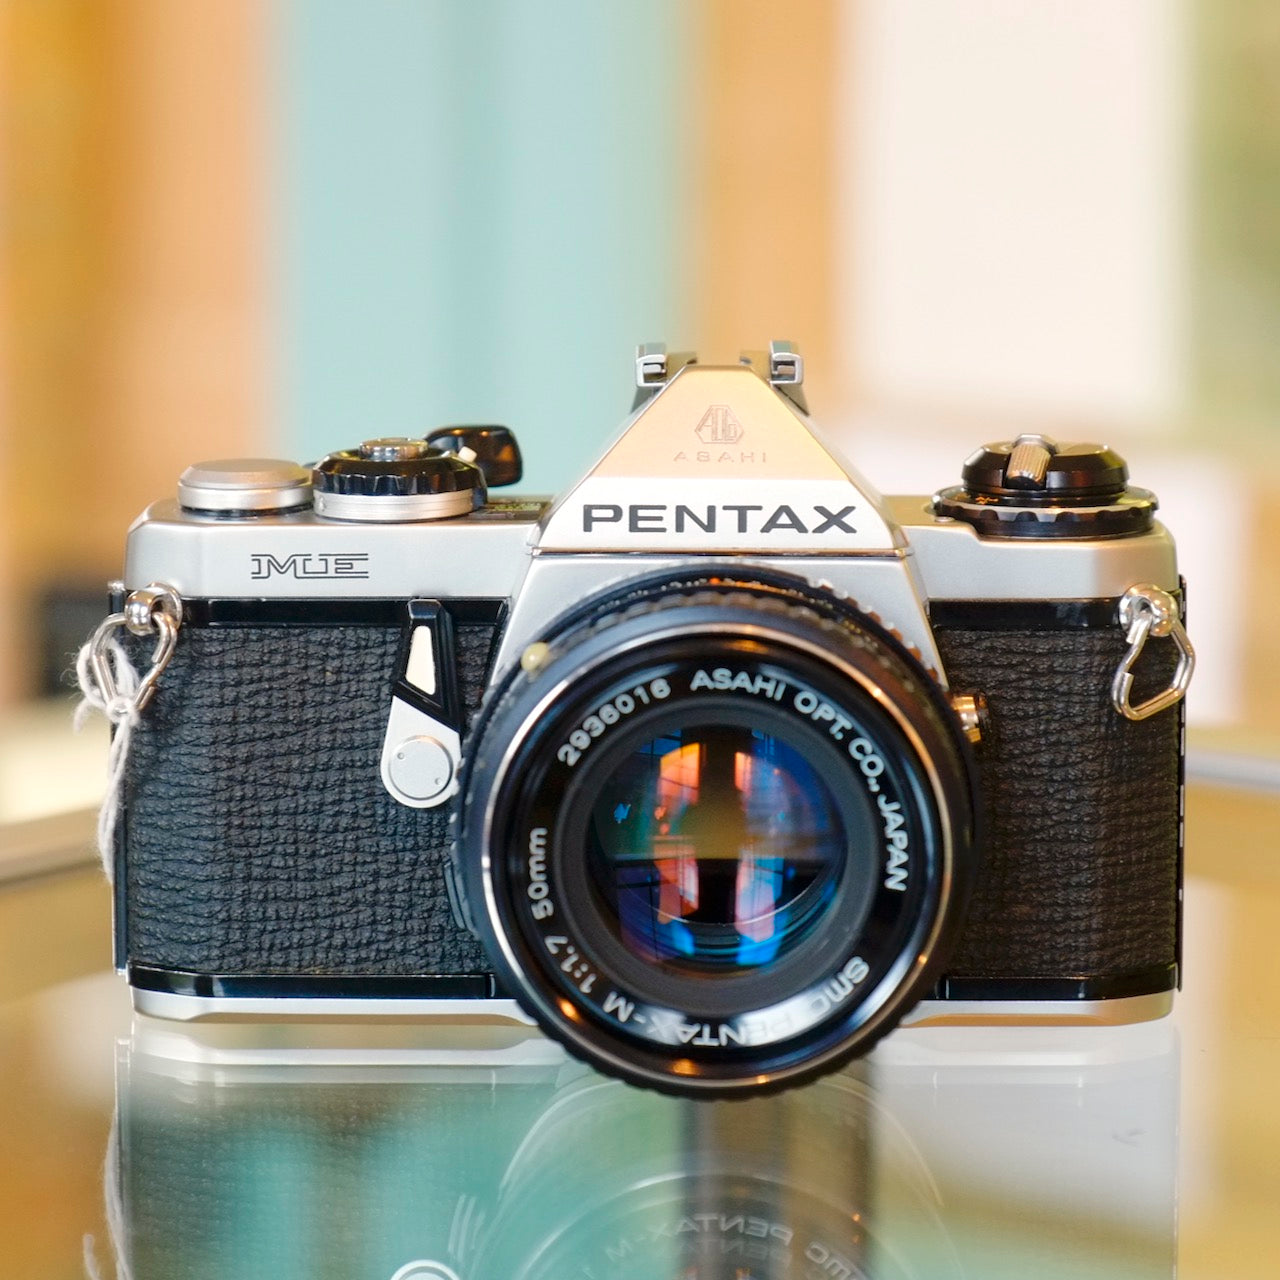 Pentax ME with 50mm f/1.7